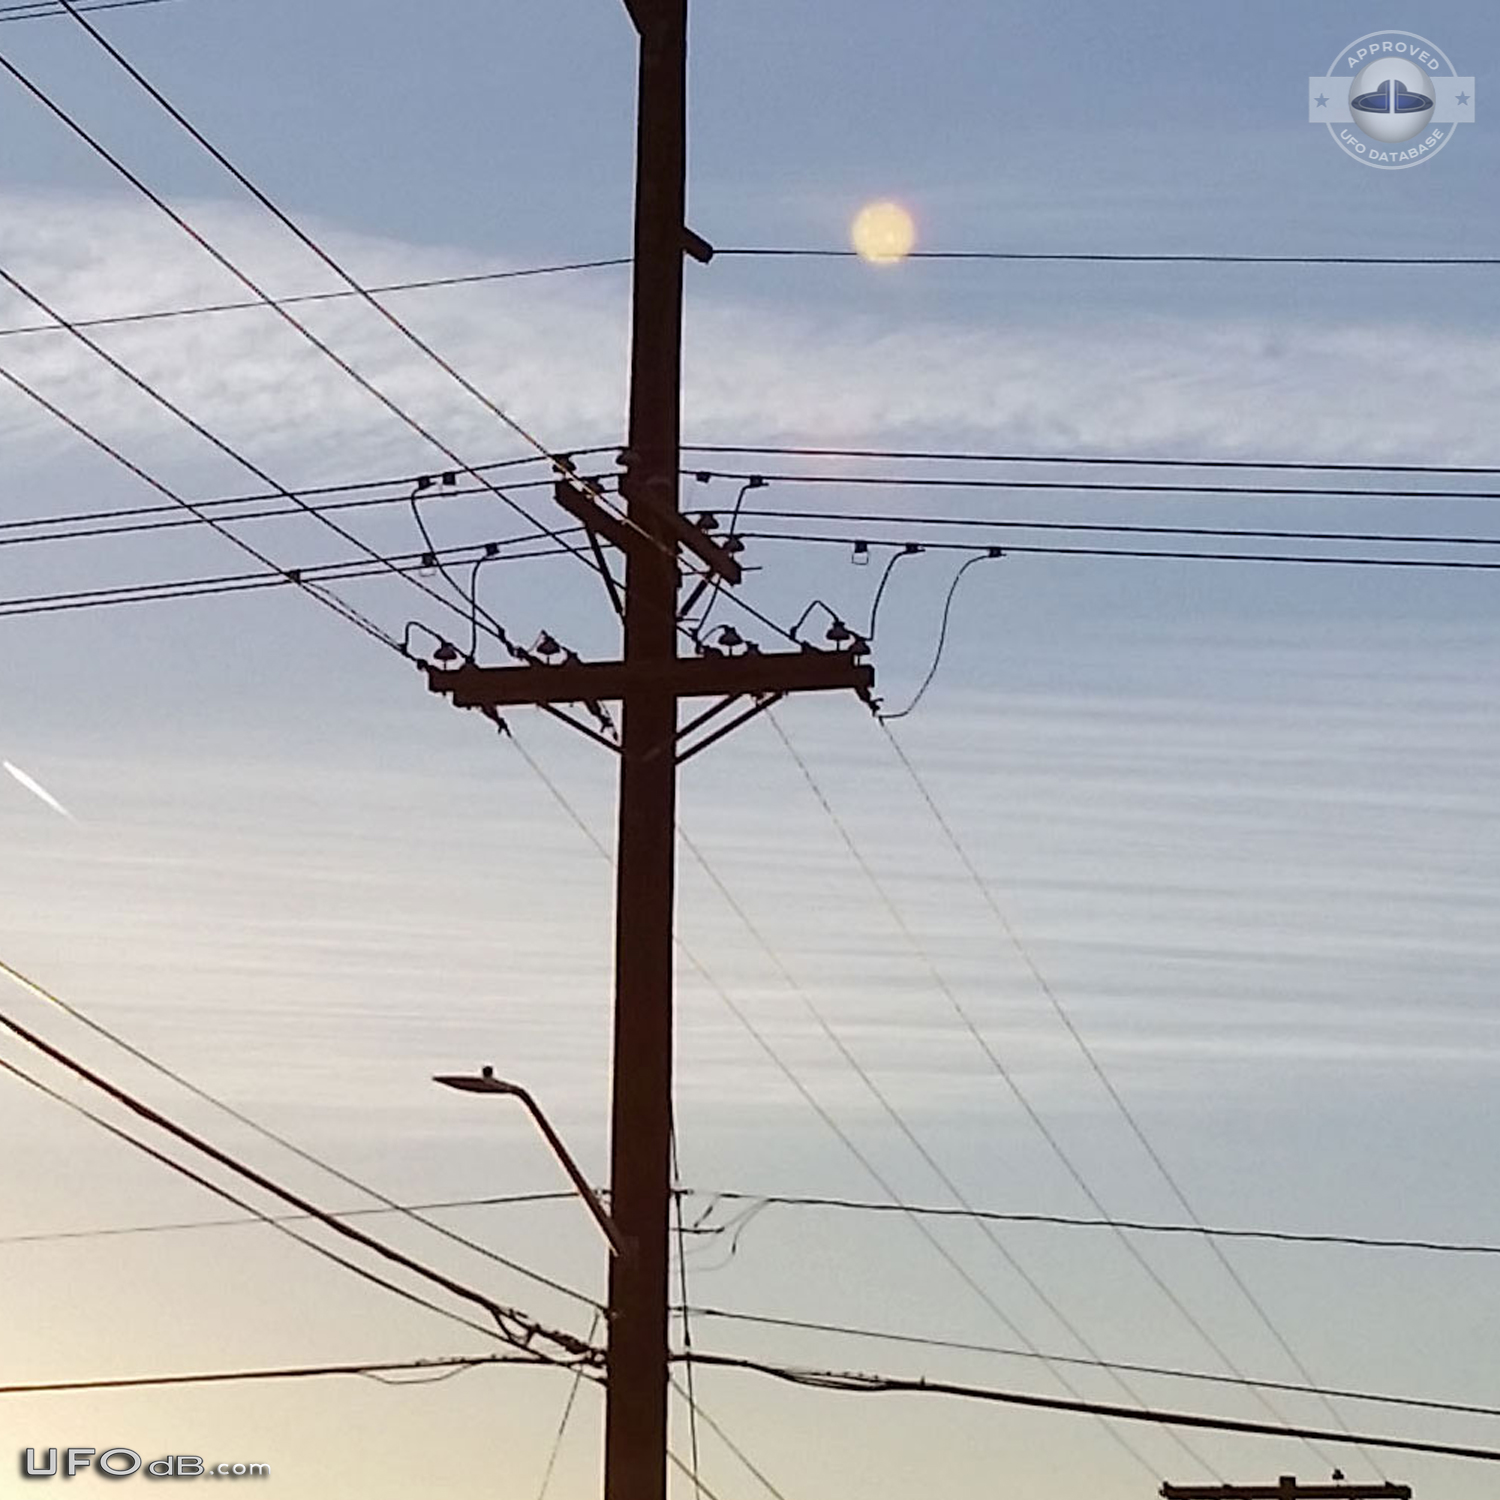 After feeling ET presence Orb UFO seen on Picture Salt Lake City 2015 UFO Picture #638-6